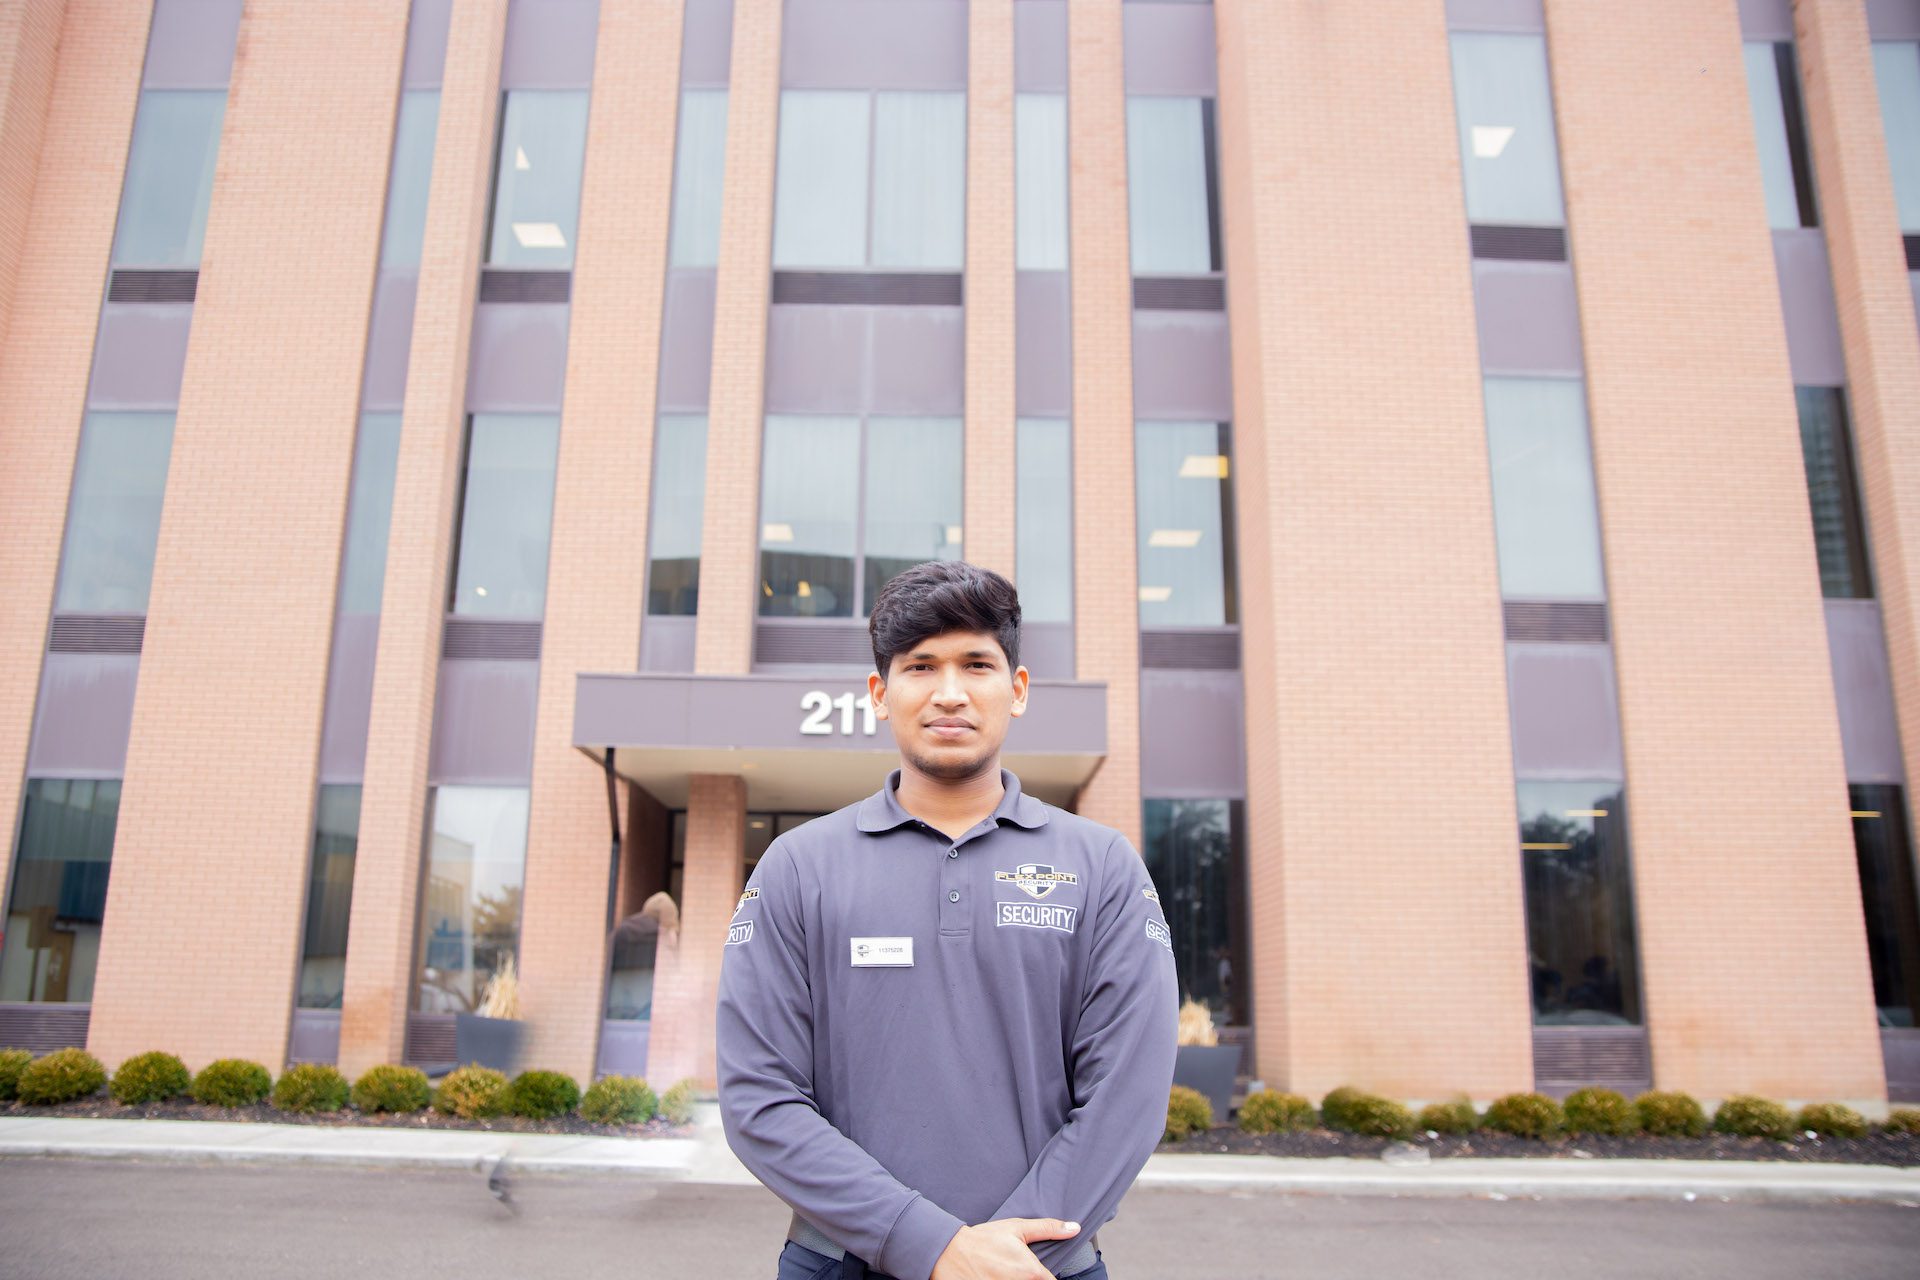 A Flex Point Security guard standing with his arms crossed outside of an office building